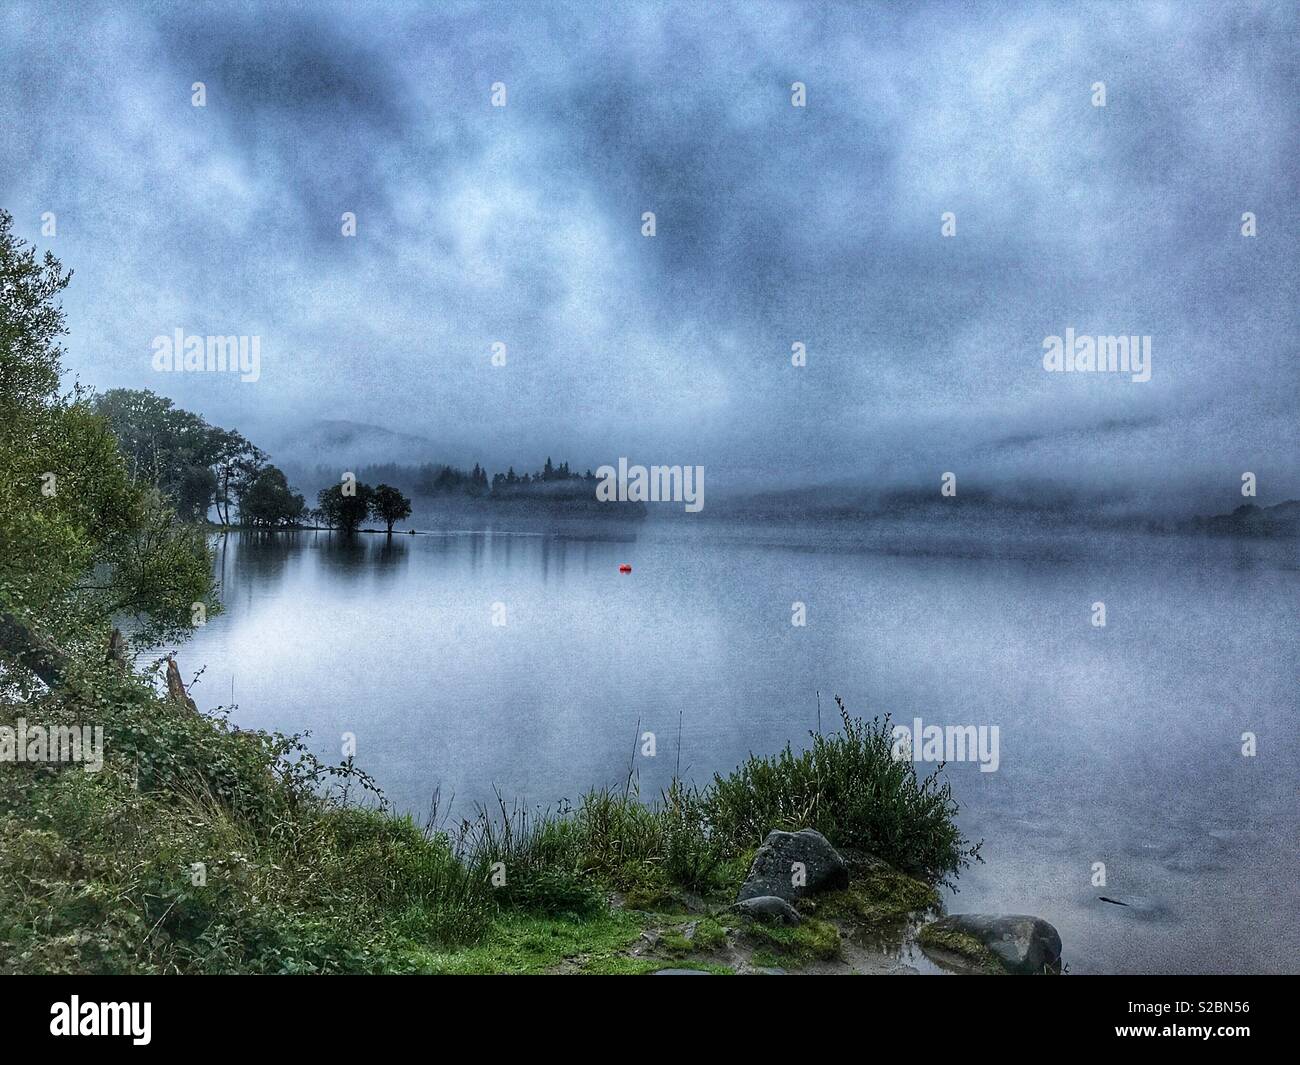 Early morning misty landscape view over a loch  in the Loch Lomond and The Trossachs National Park, Perthshire, Scotland Stock Photo